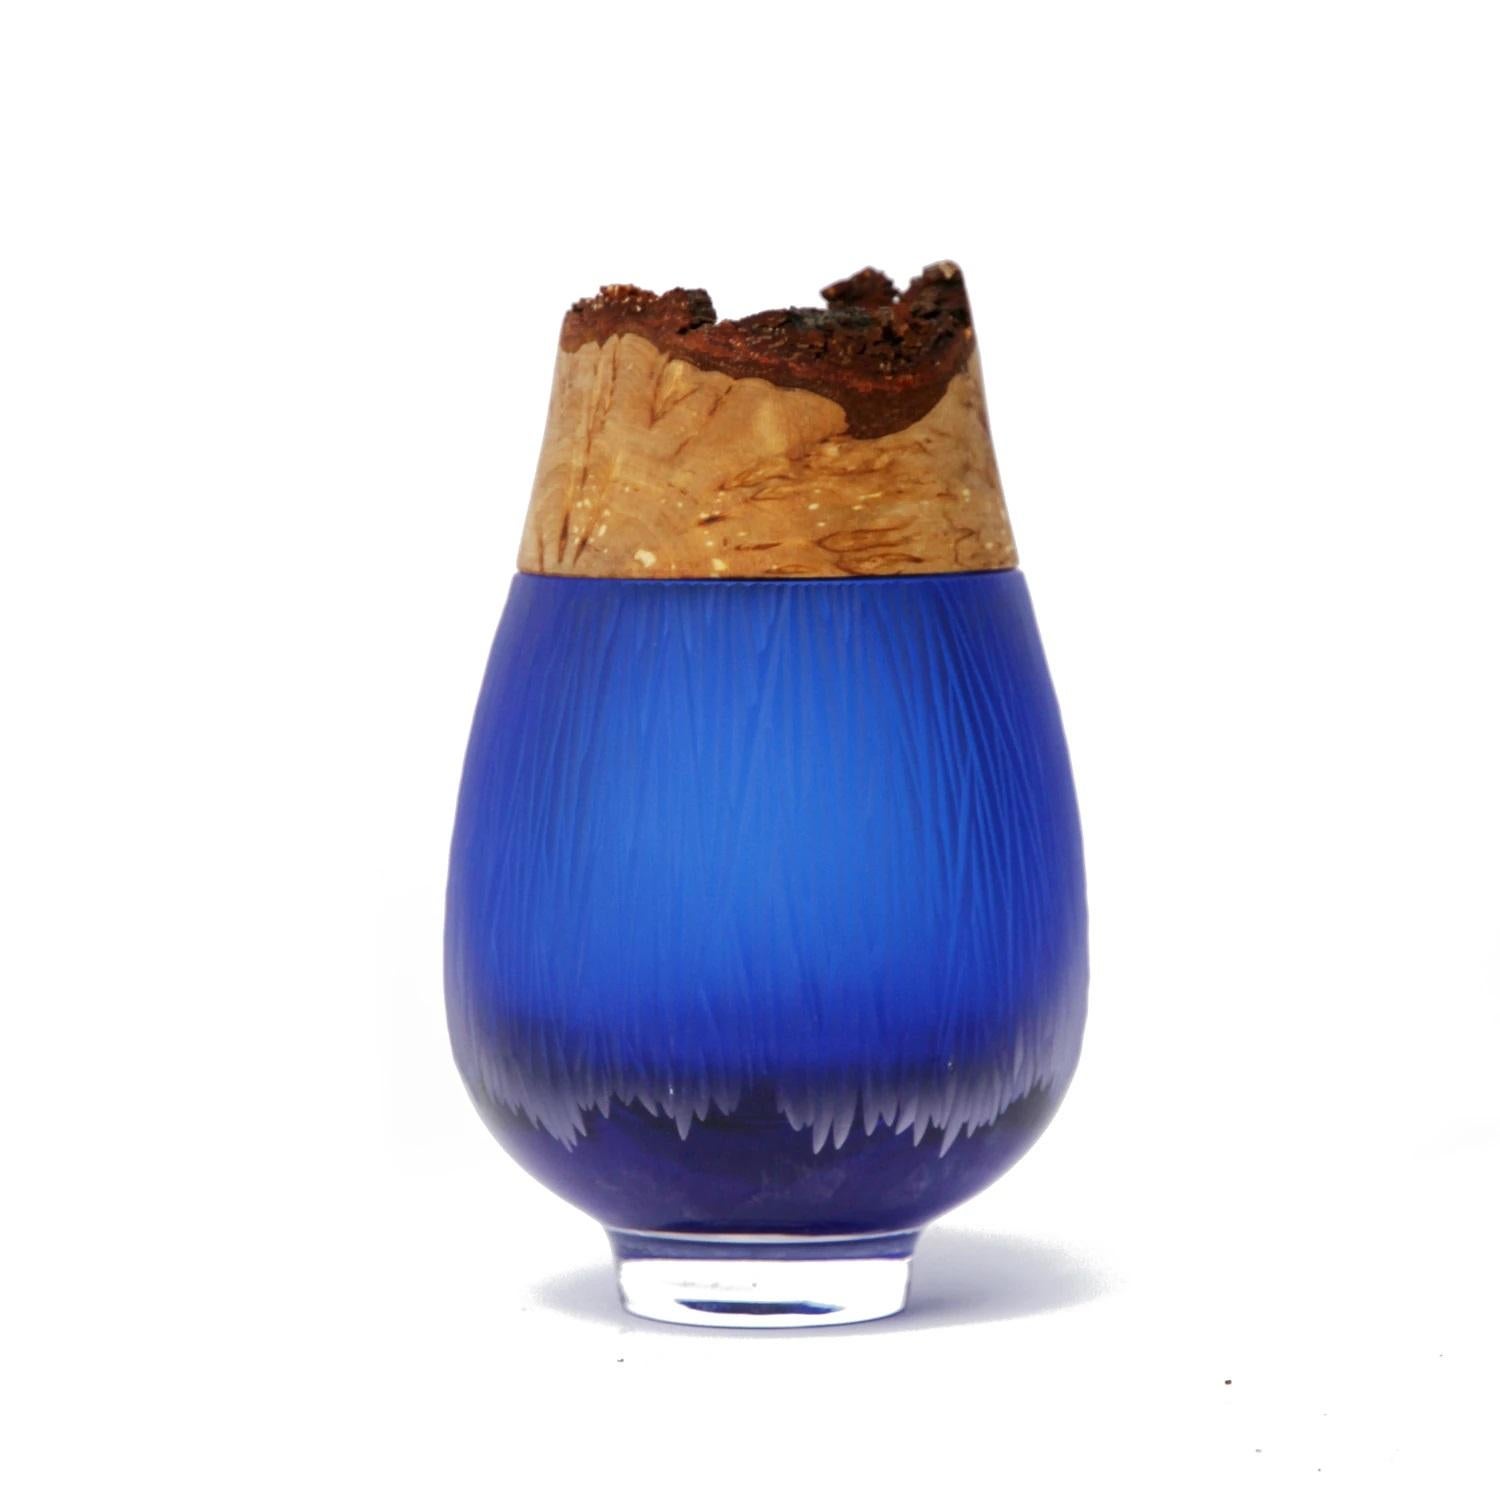 Spun Iris Blue Frida with Fine Cuts Stacking Vessel, Pia Wüstenberg For Sale